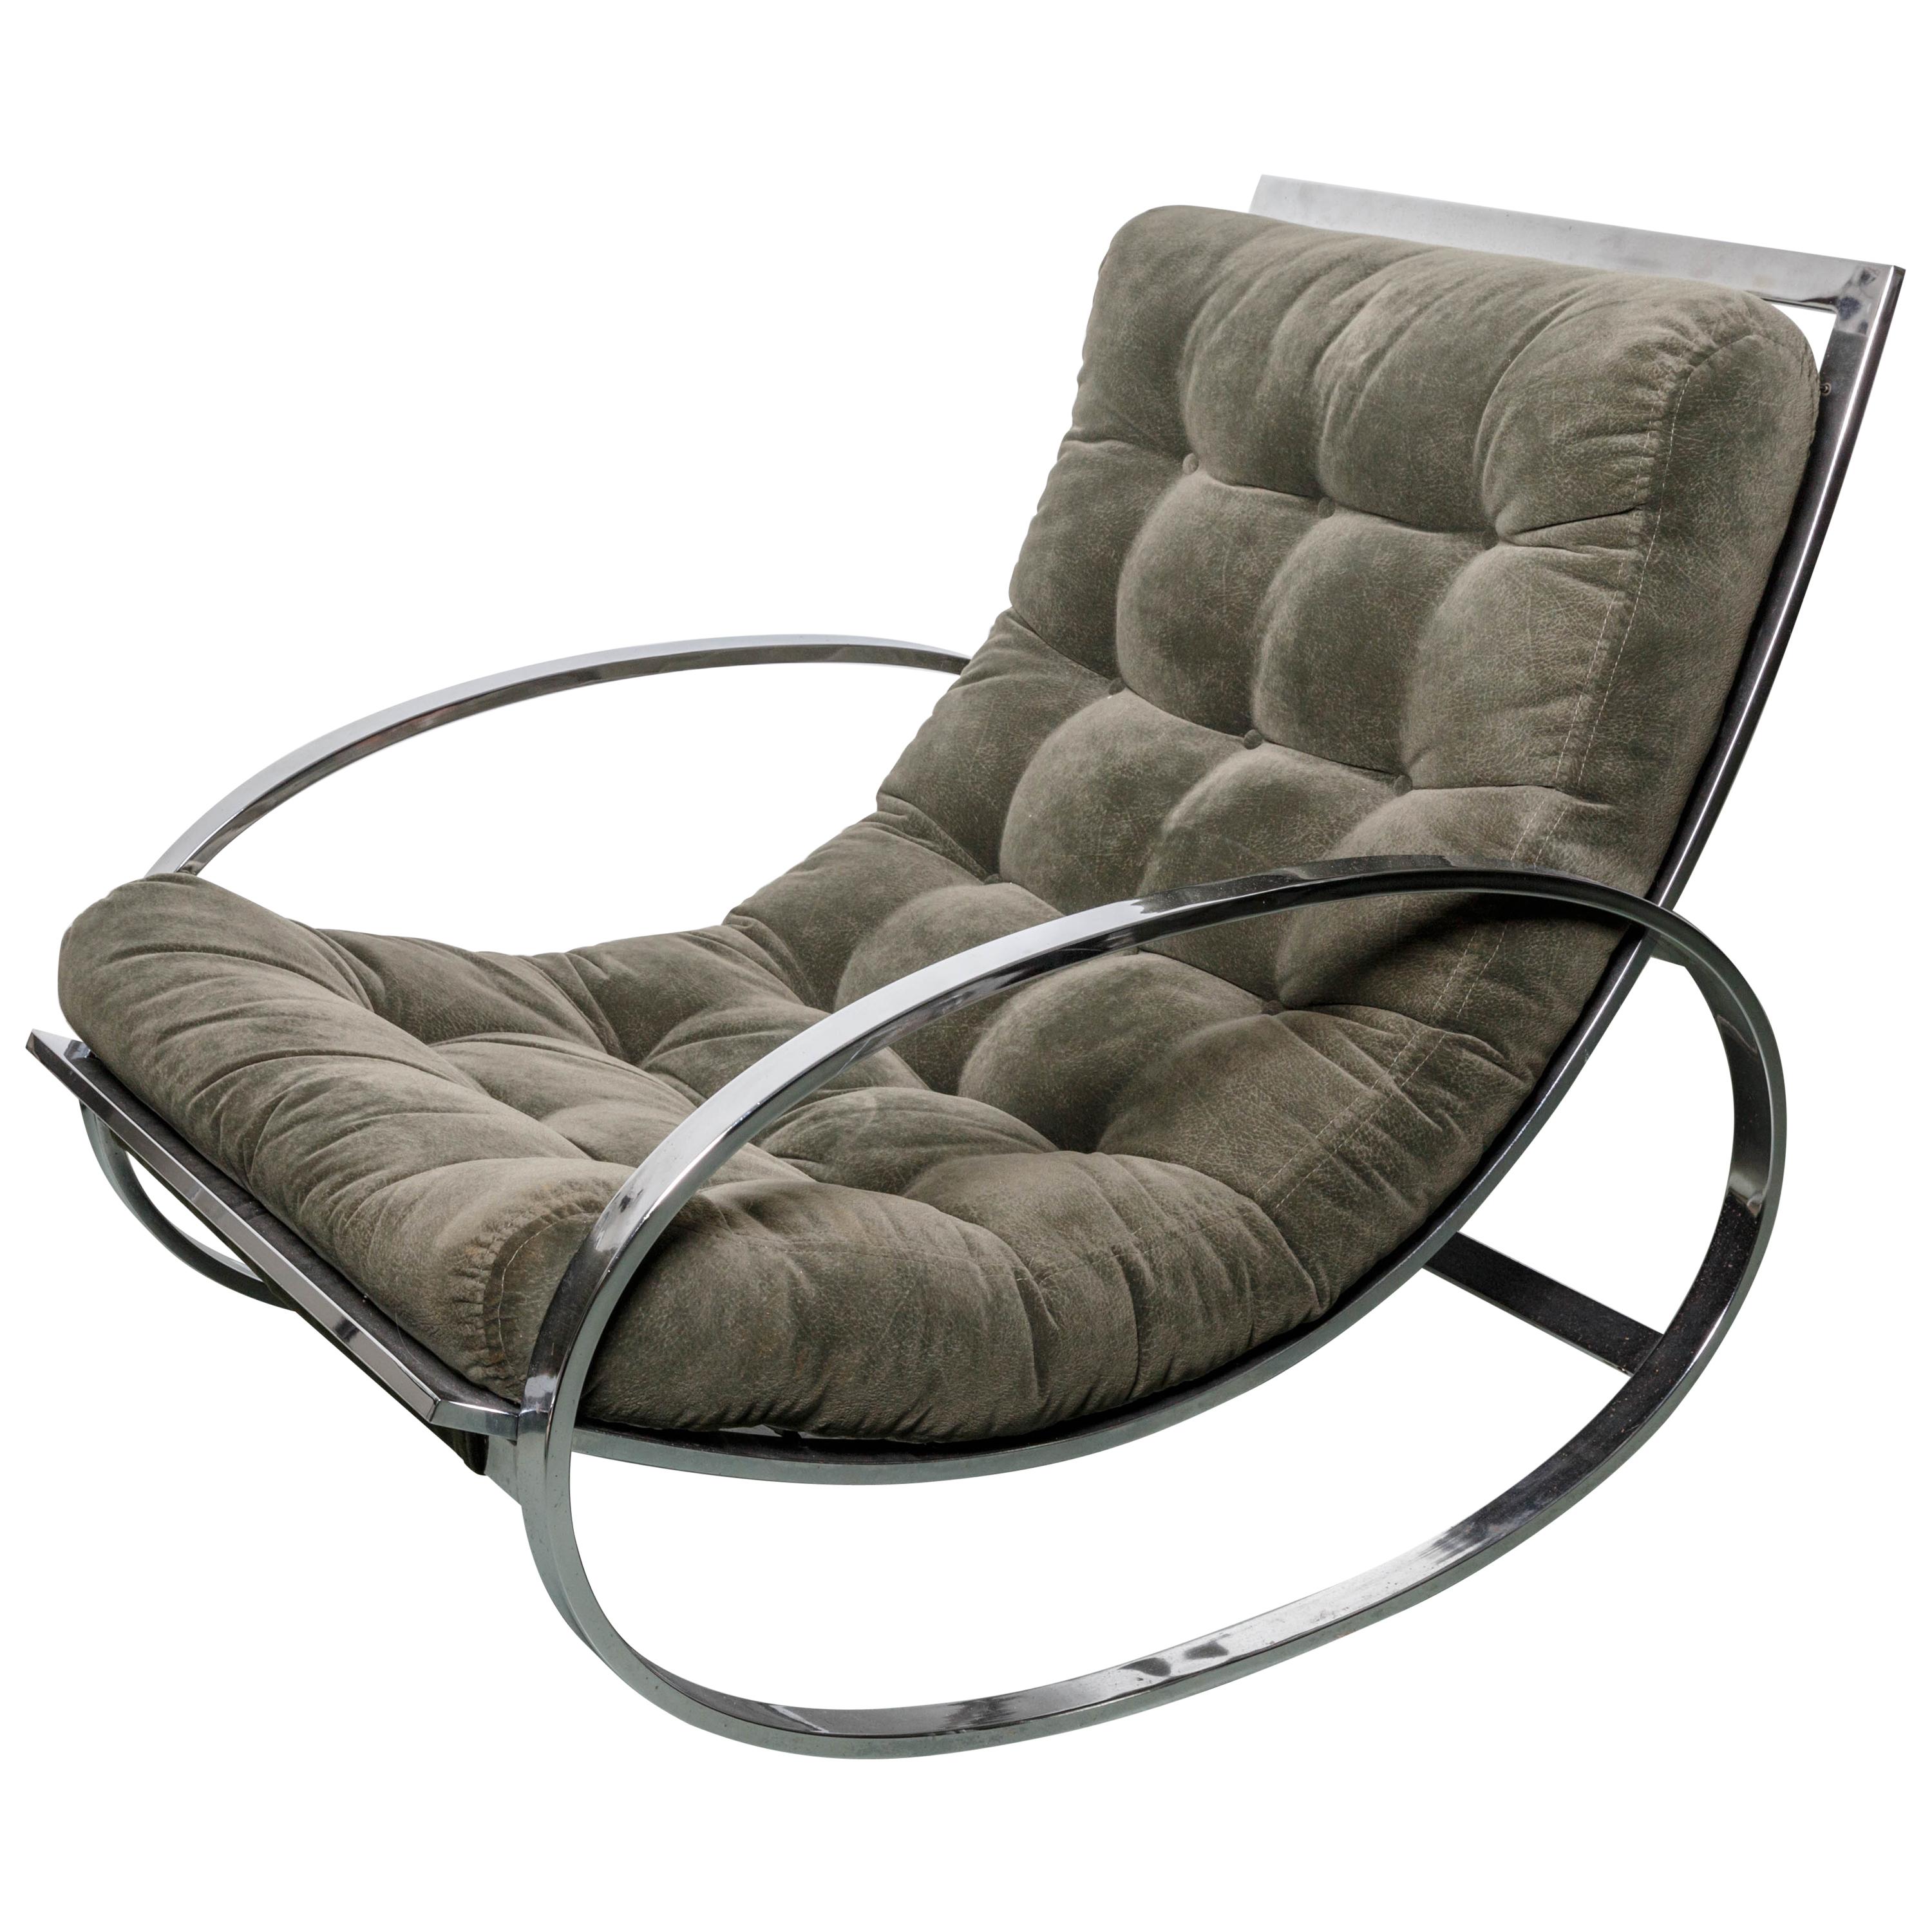 Renato Zevi Ellipse Rocking Chair and Ottoman, in the style of Milo Baughm